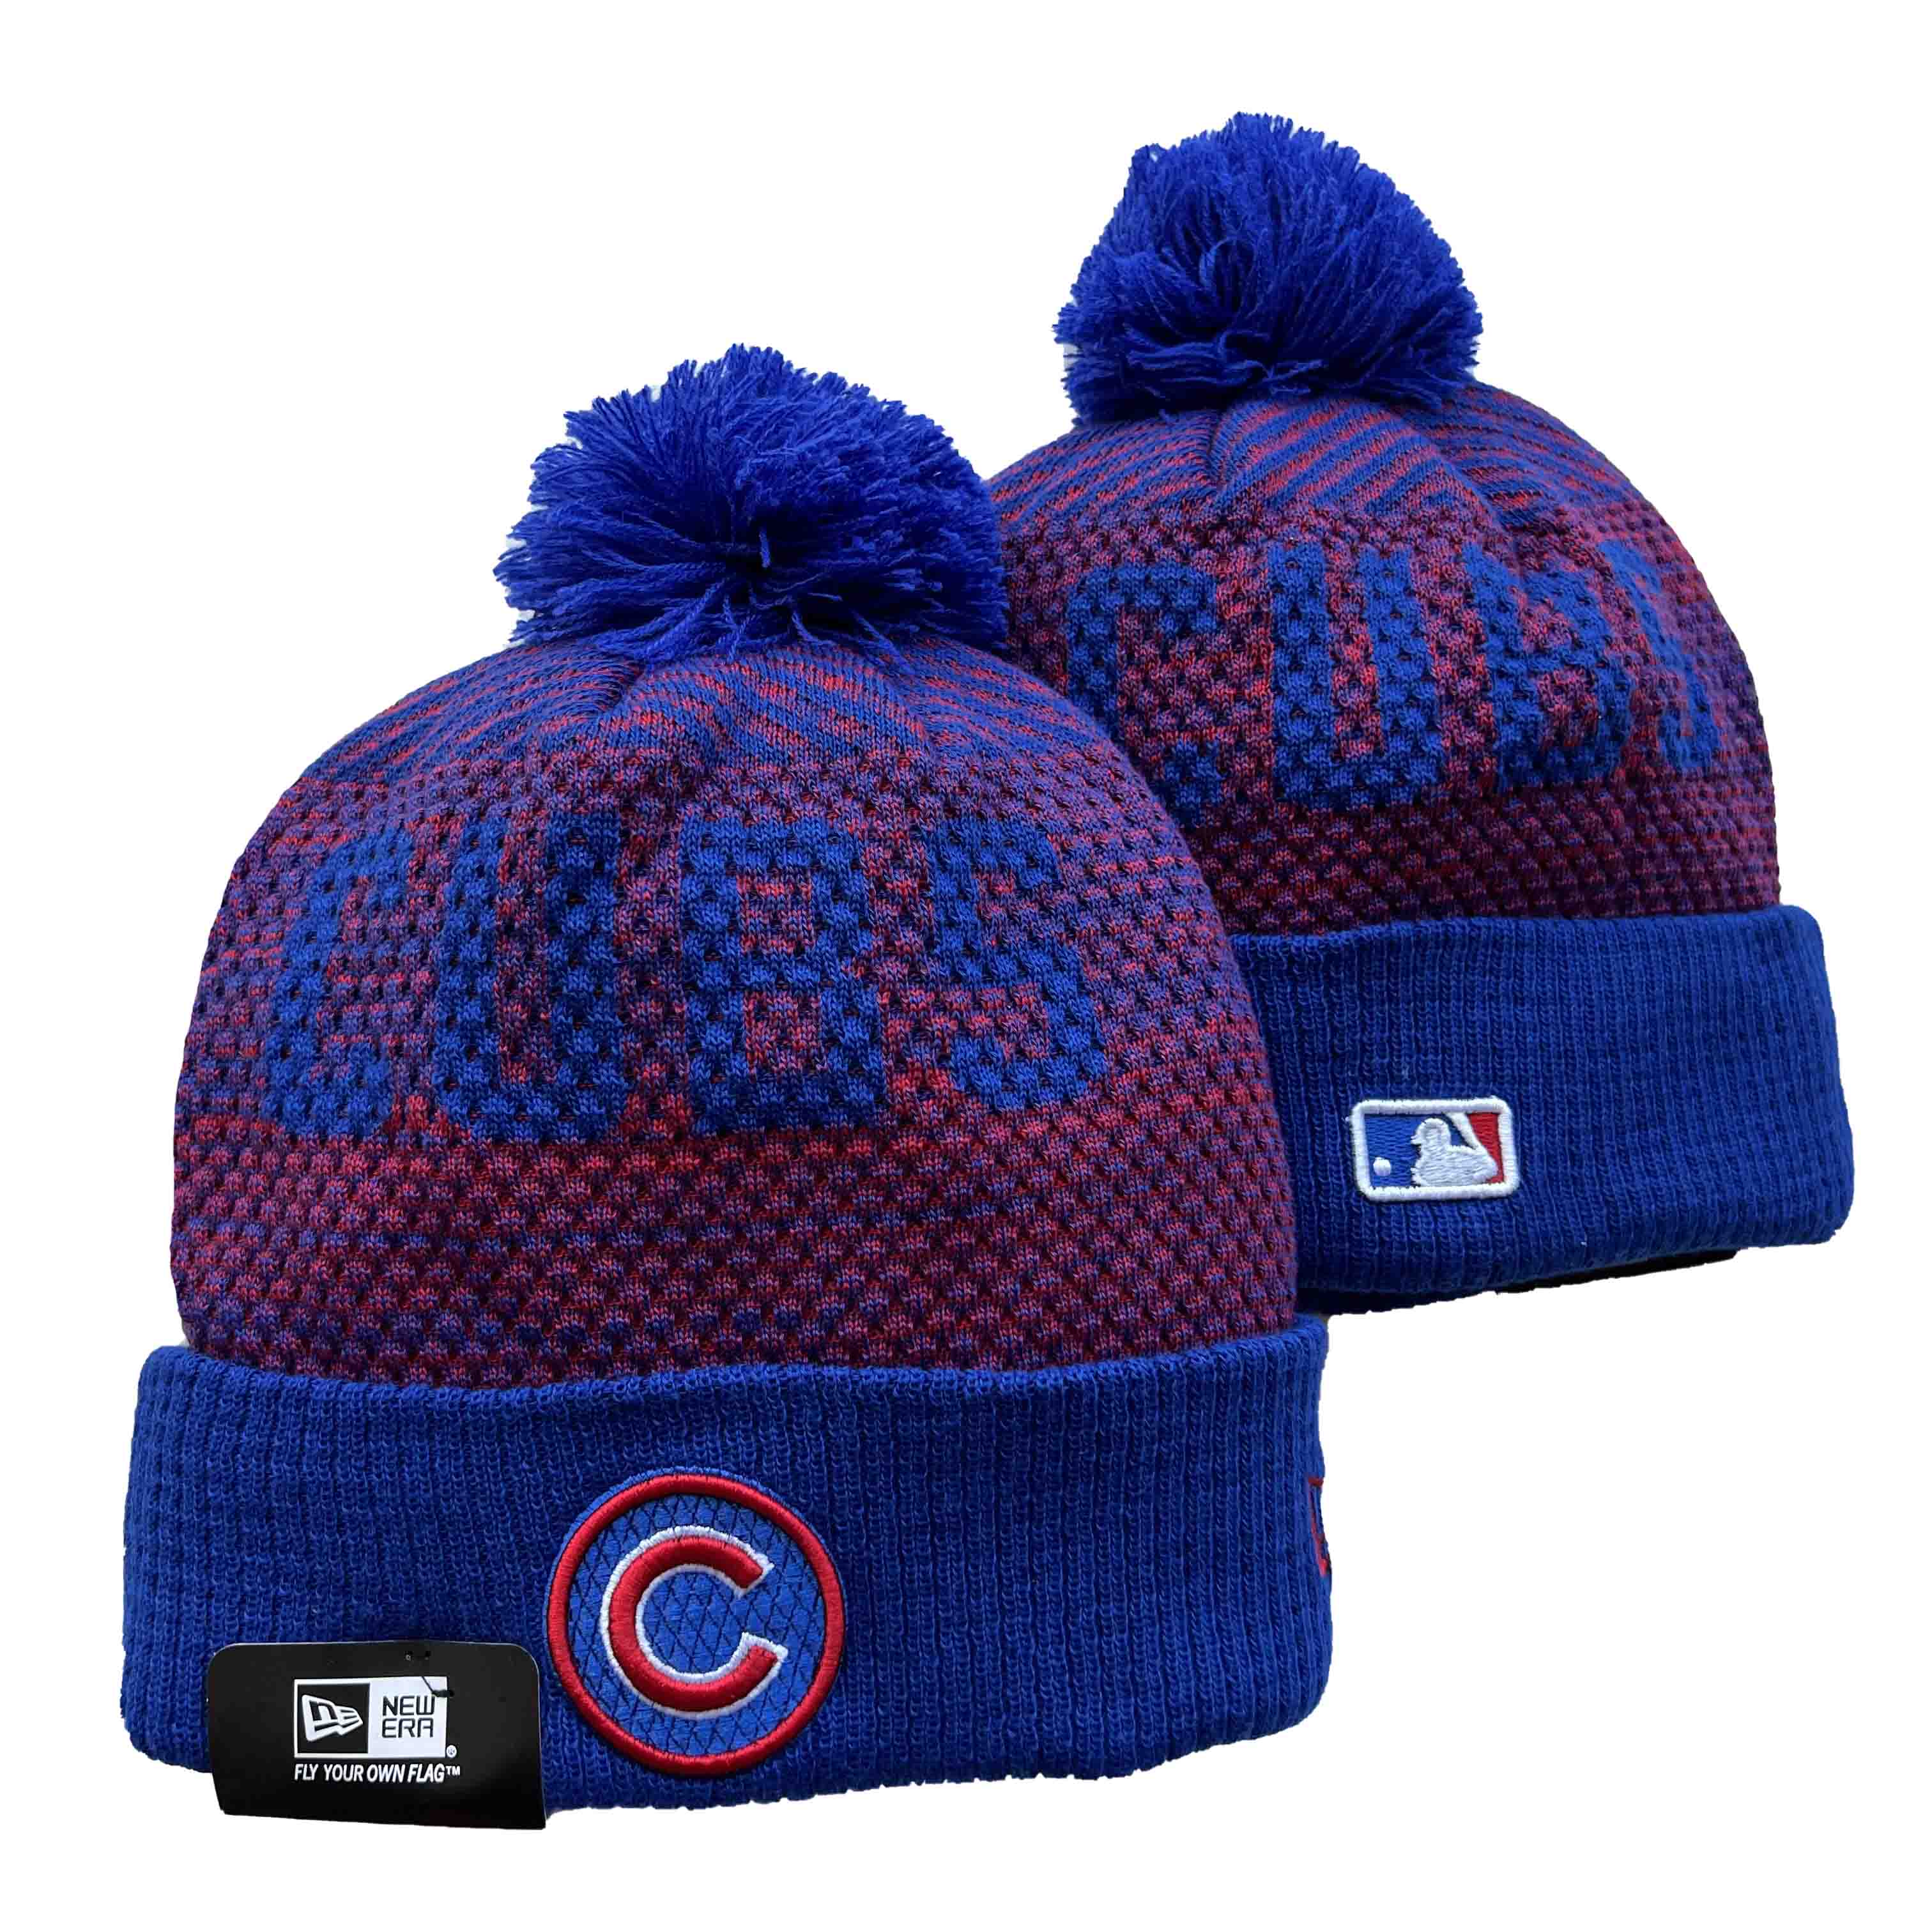 MLB Chicago Cubs Beanies Knit Hats-YD107